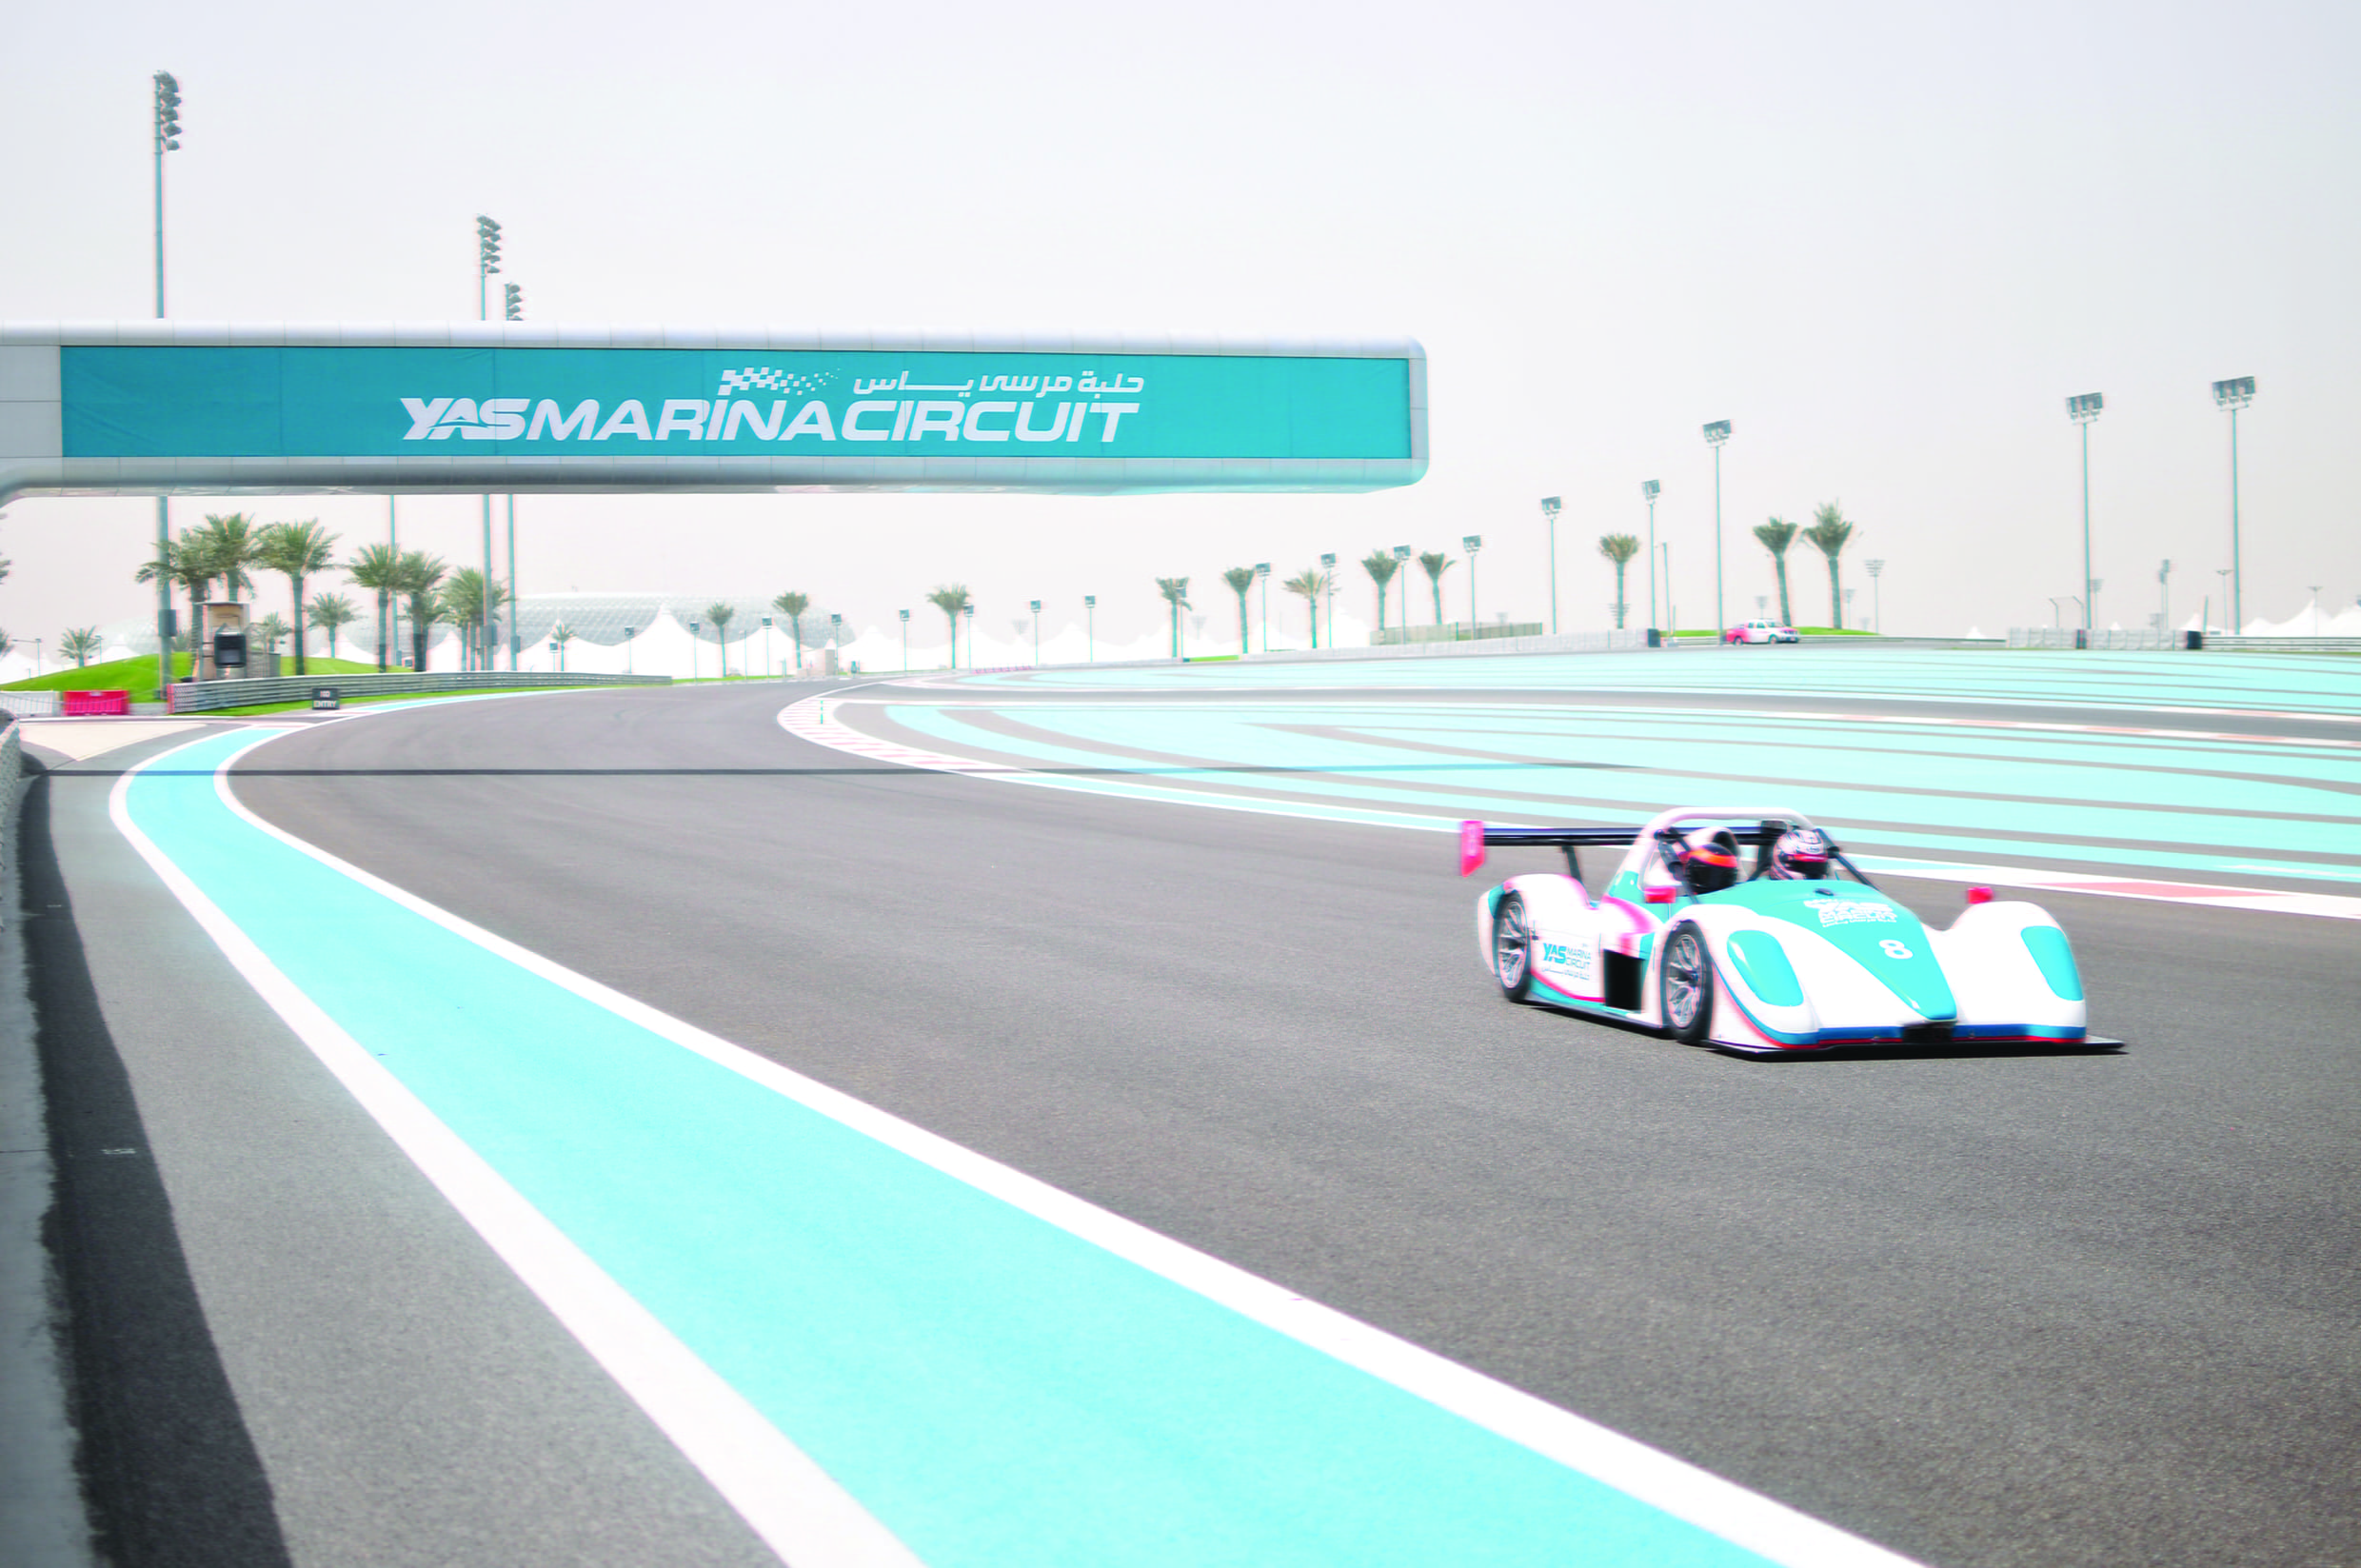 Our Yas Marina Circuit competition winner is...